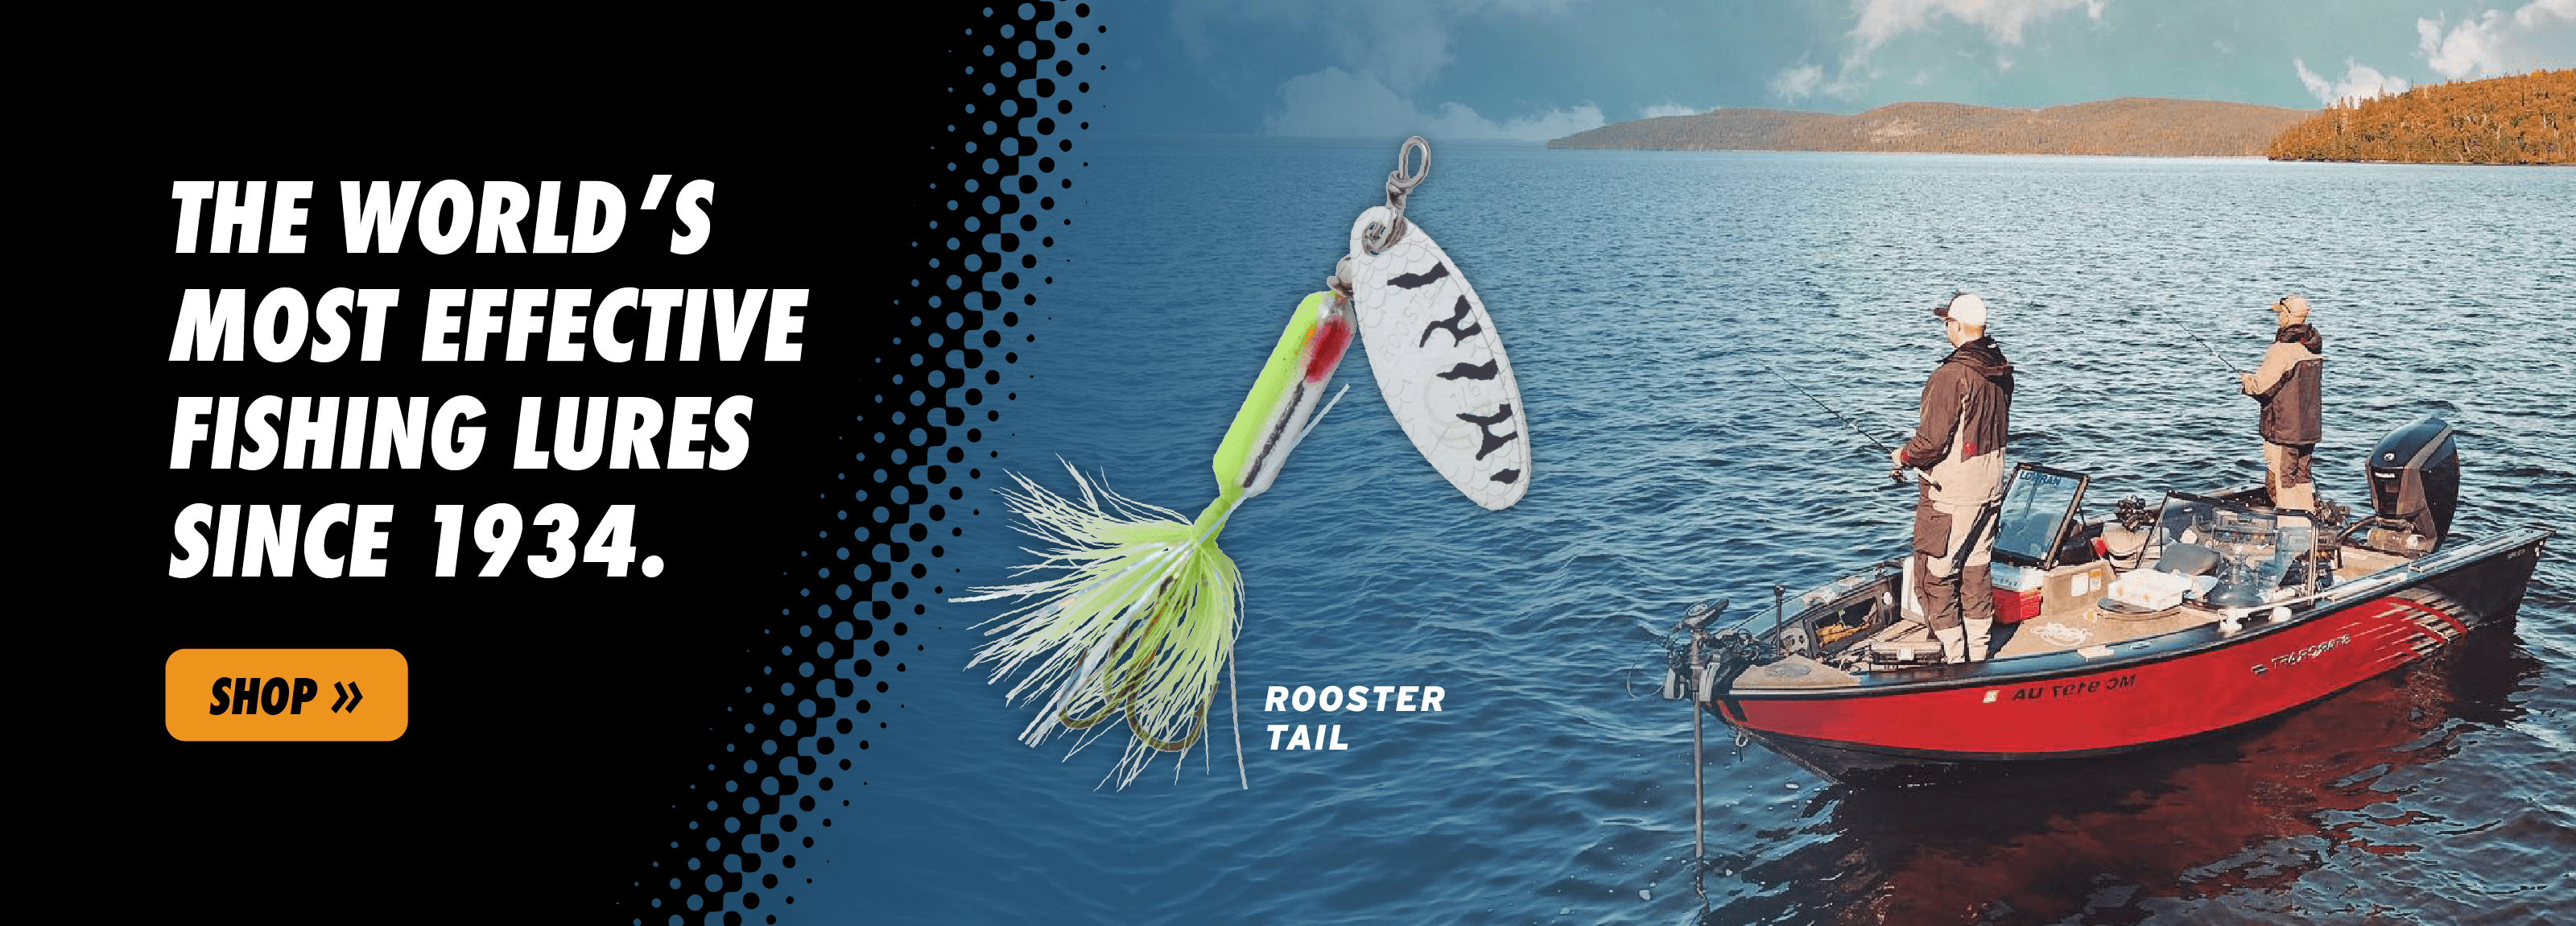 World;s Most Effective Fishing Lures since 1934 - Rooster Tail